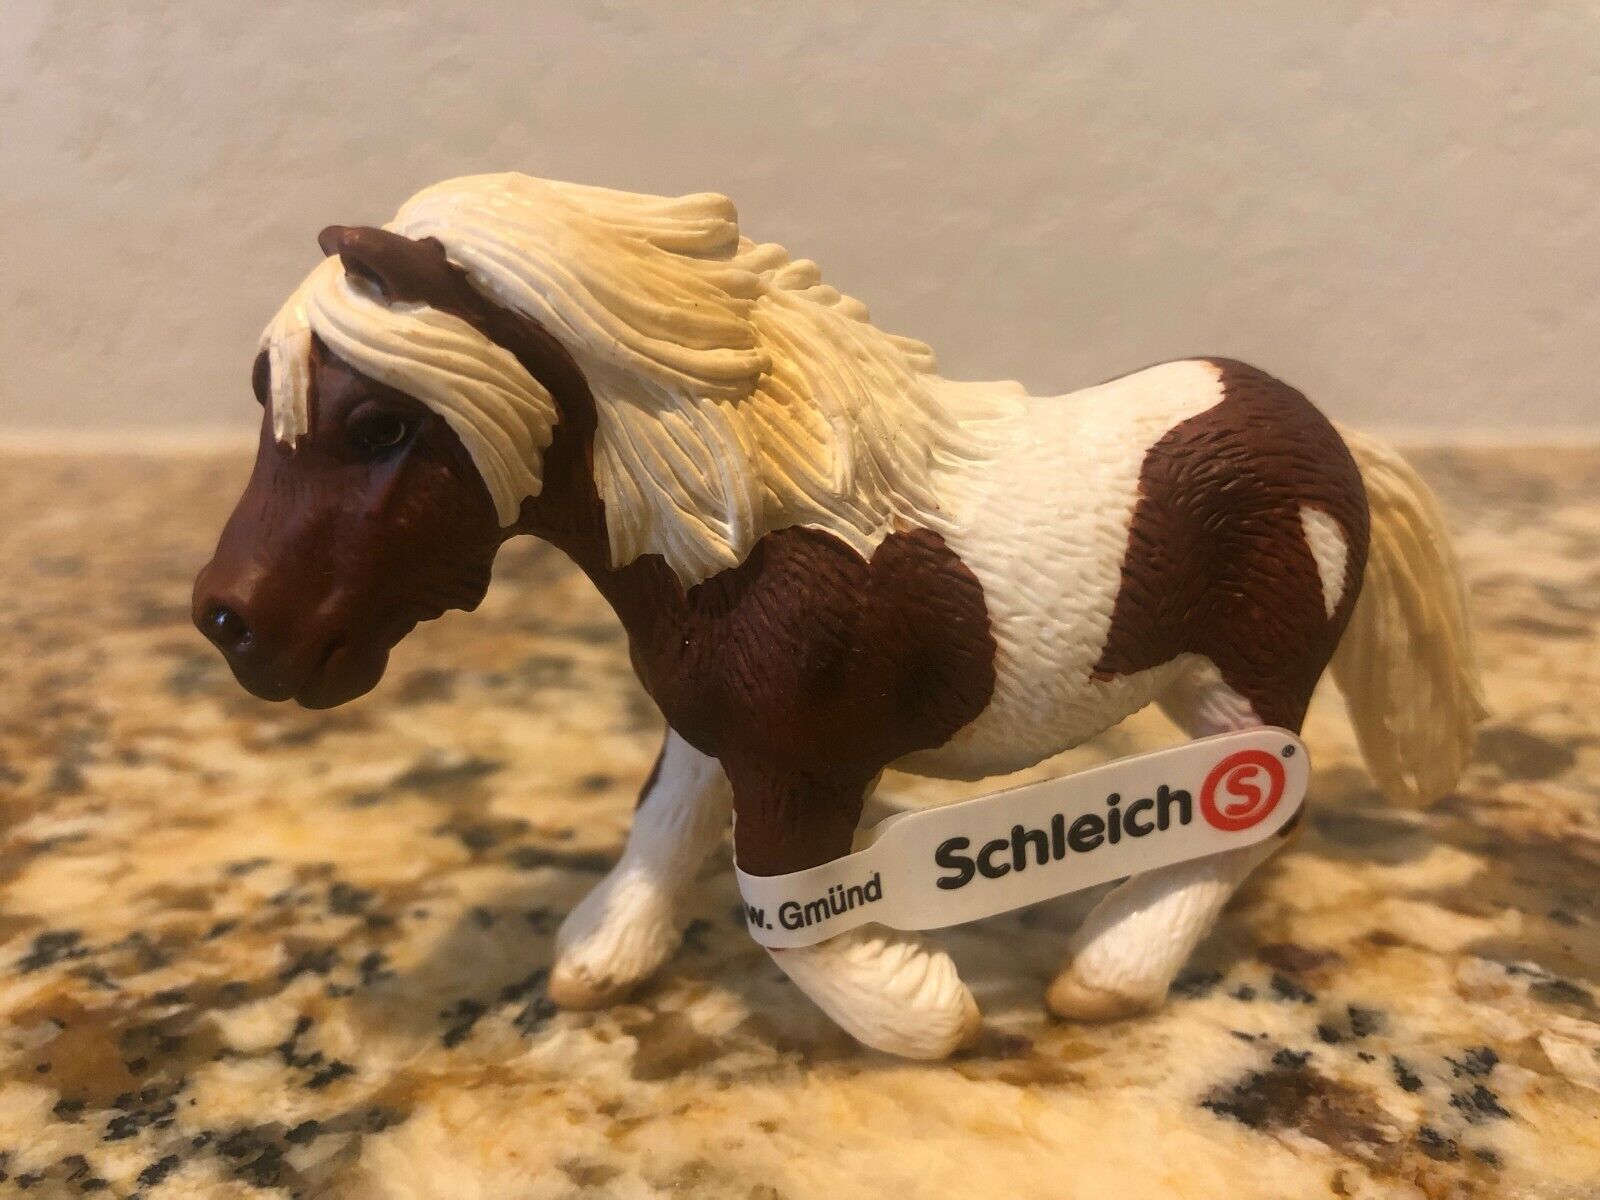 Schleich SHETLAND PONY Horse Animal Figure Retired 13297 Rare BRAND NEW WITH TAG